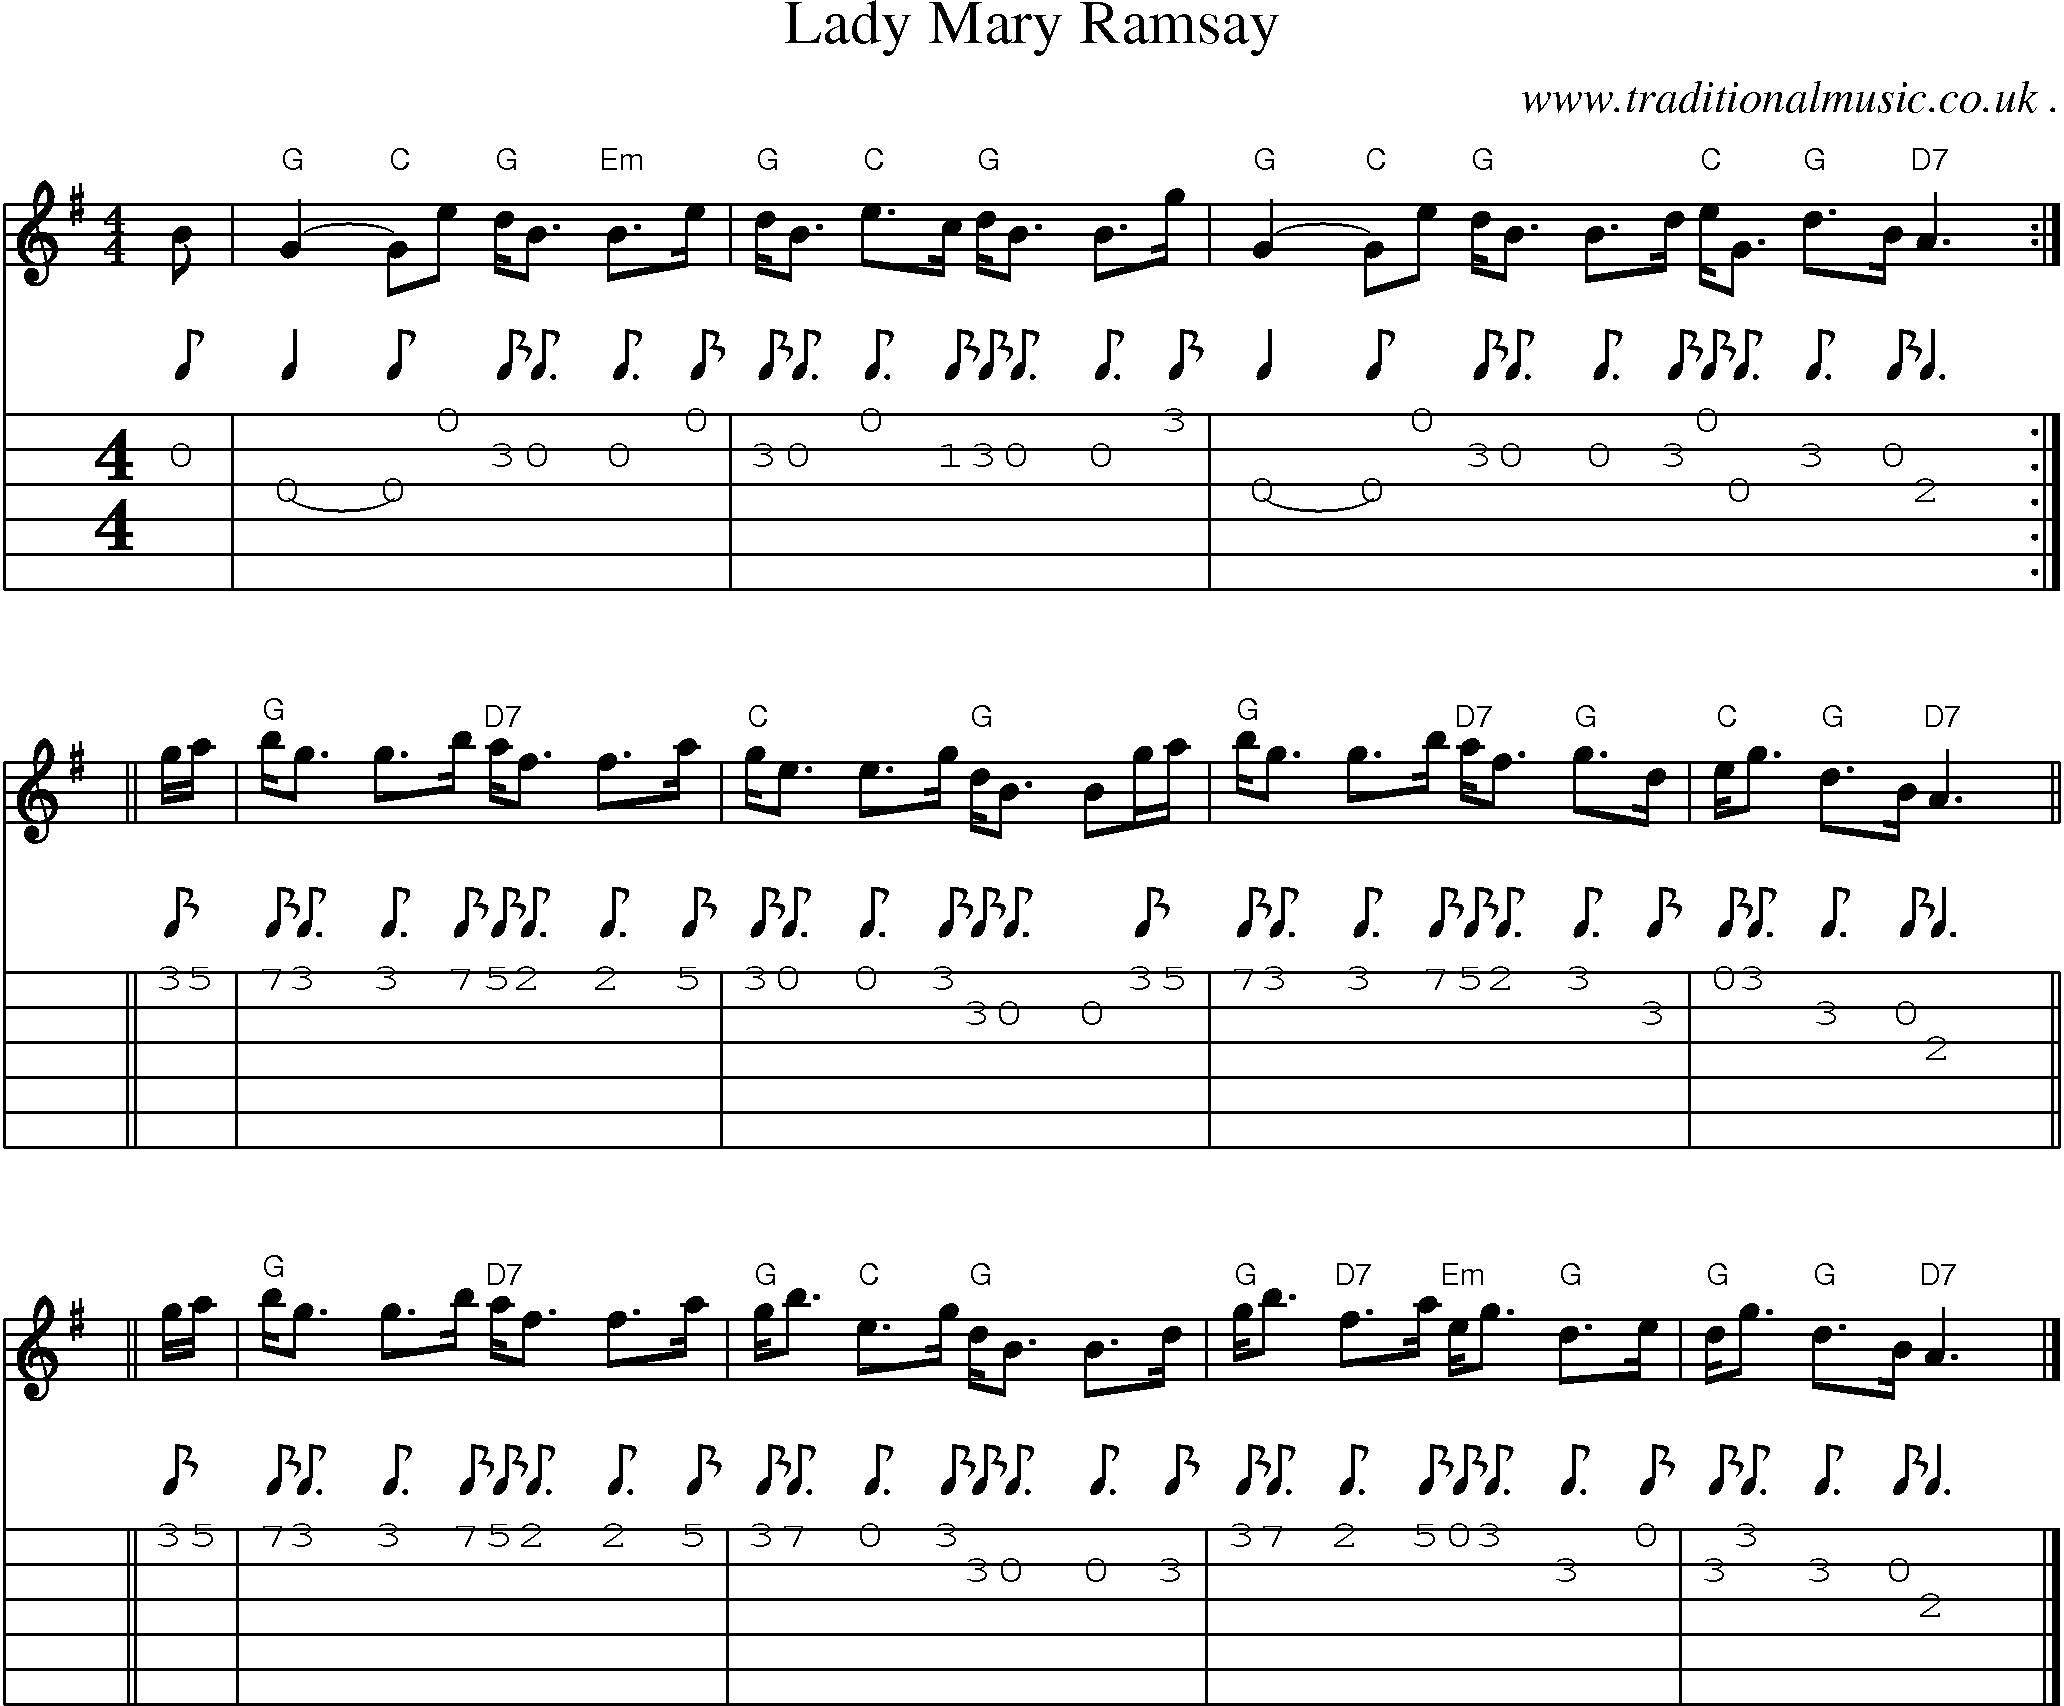 Sheet-music  score, Chords and Guitar Tabs for Lady Mary Ramsay